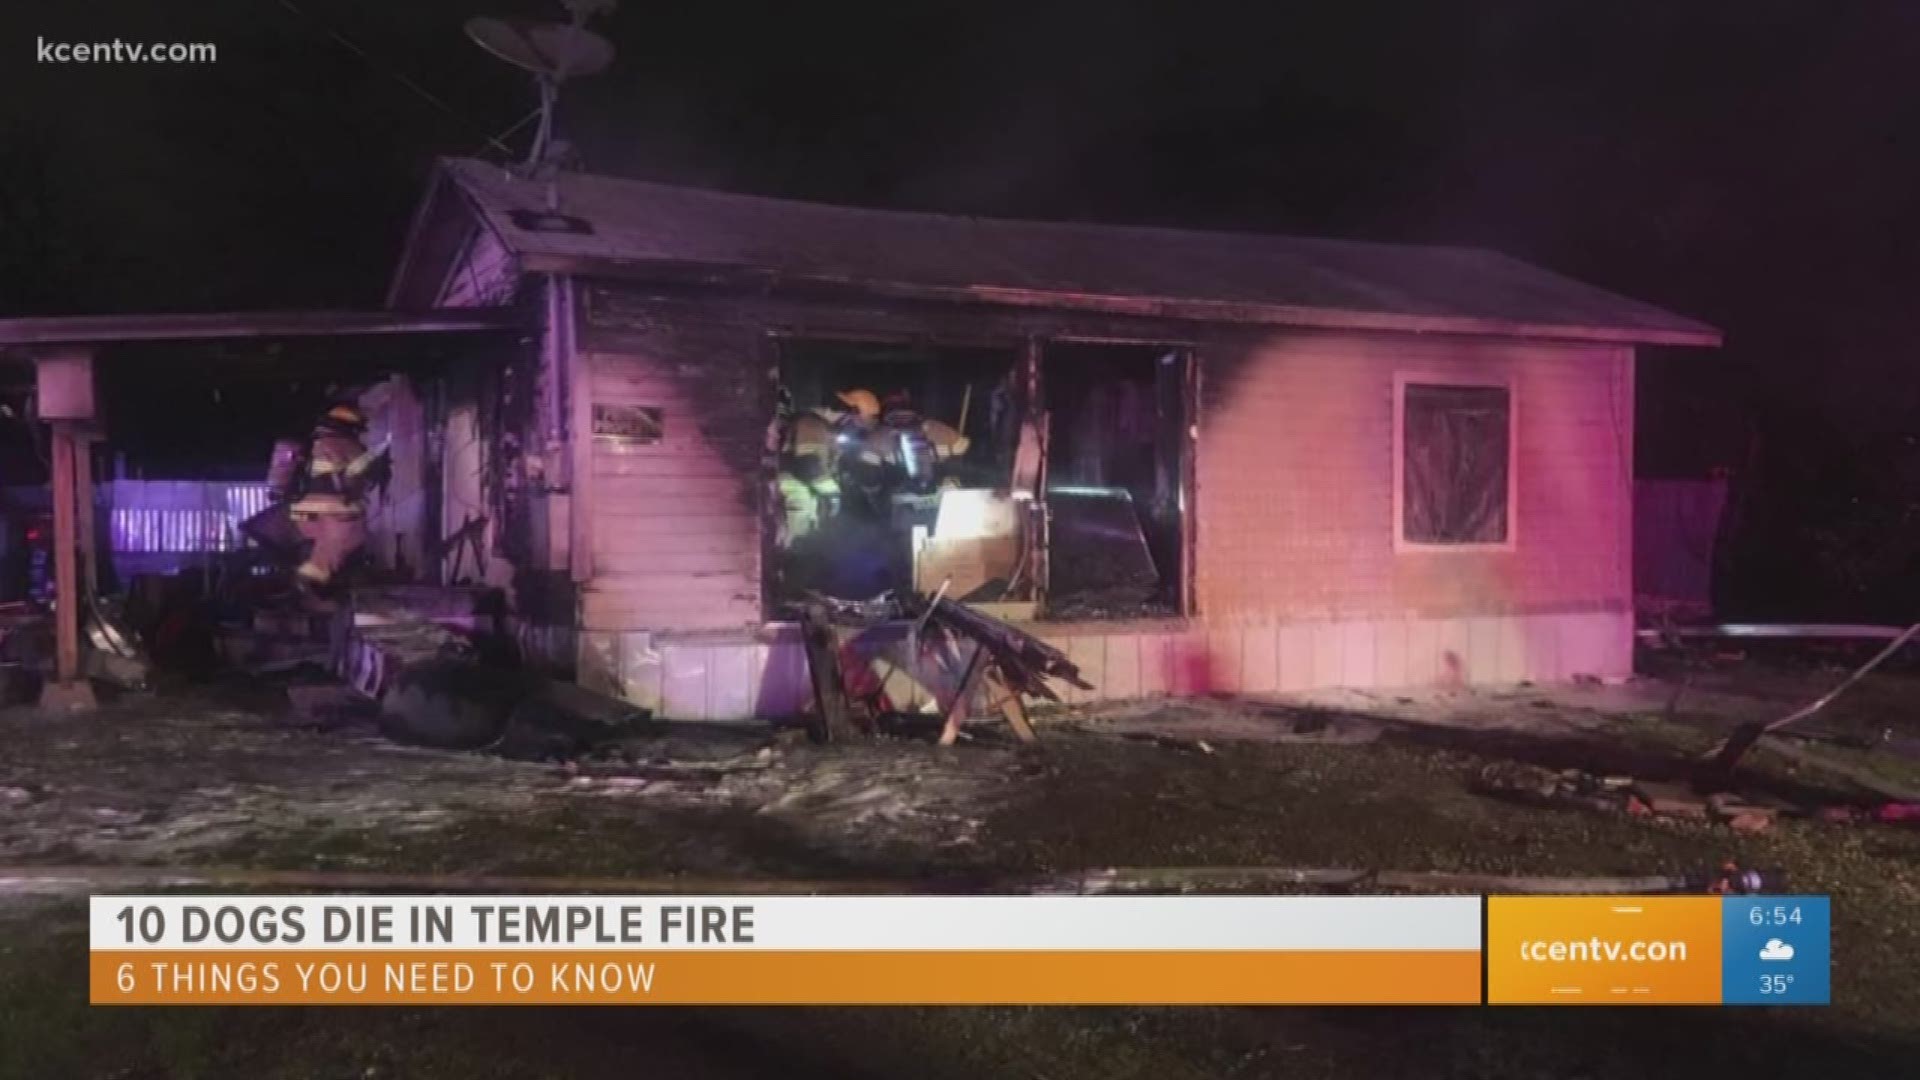 Before you go, there are 6 things you should know. Here's one of them: a Wednesday night house fire in Temple leaves 10 dogs dead and no humans injured.